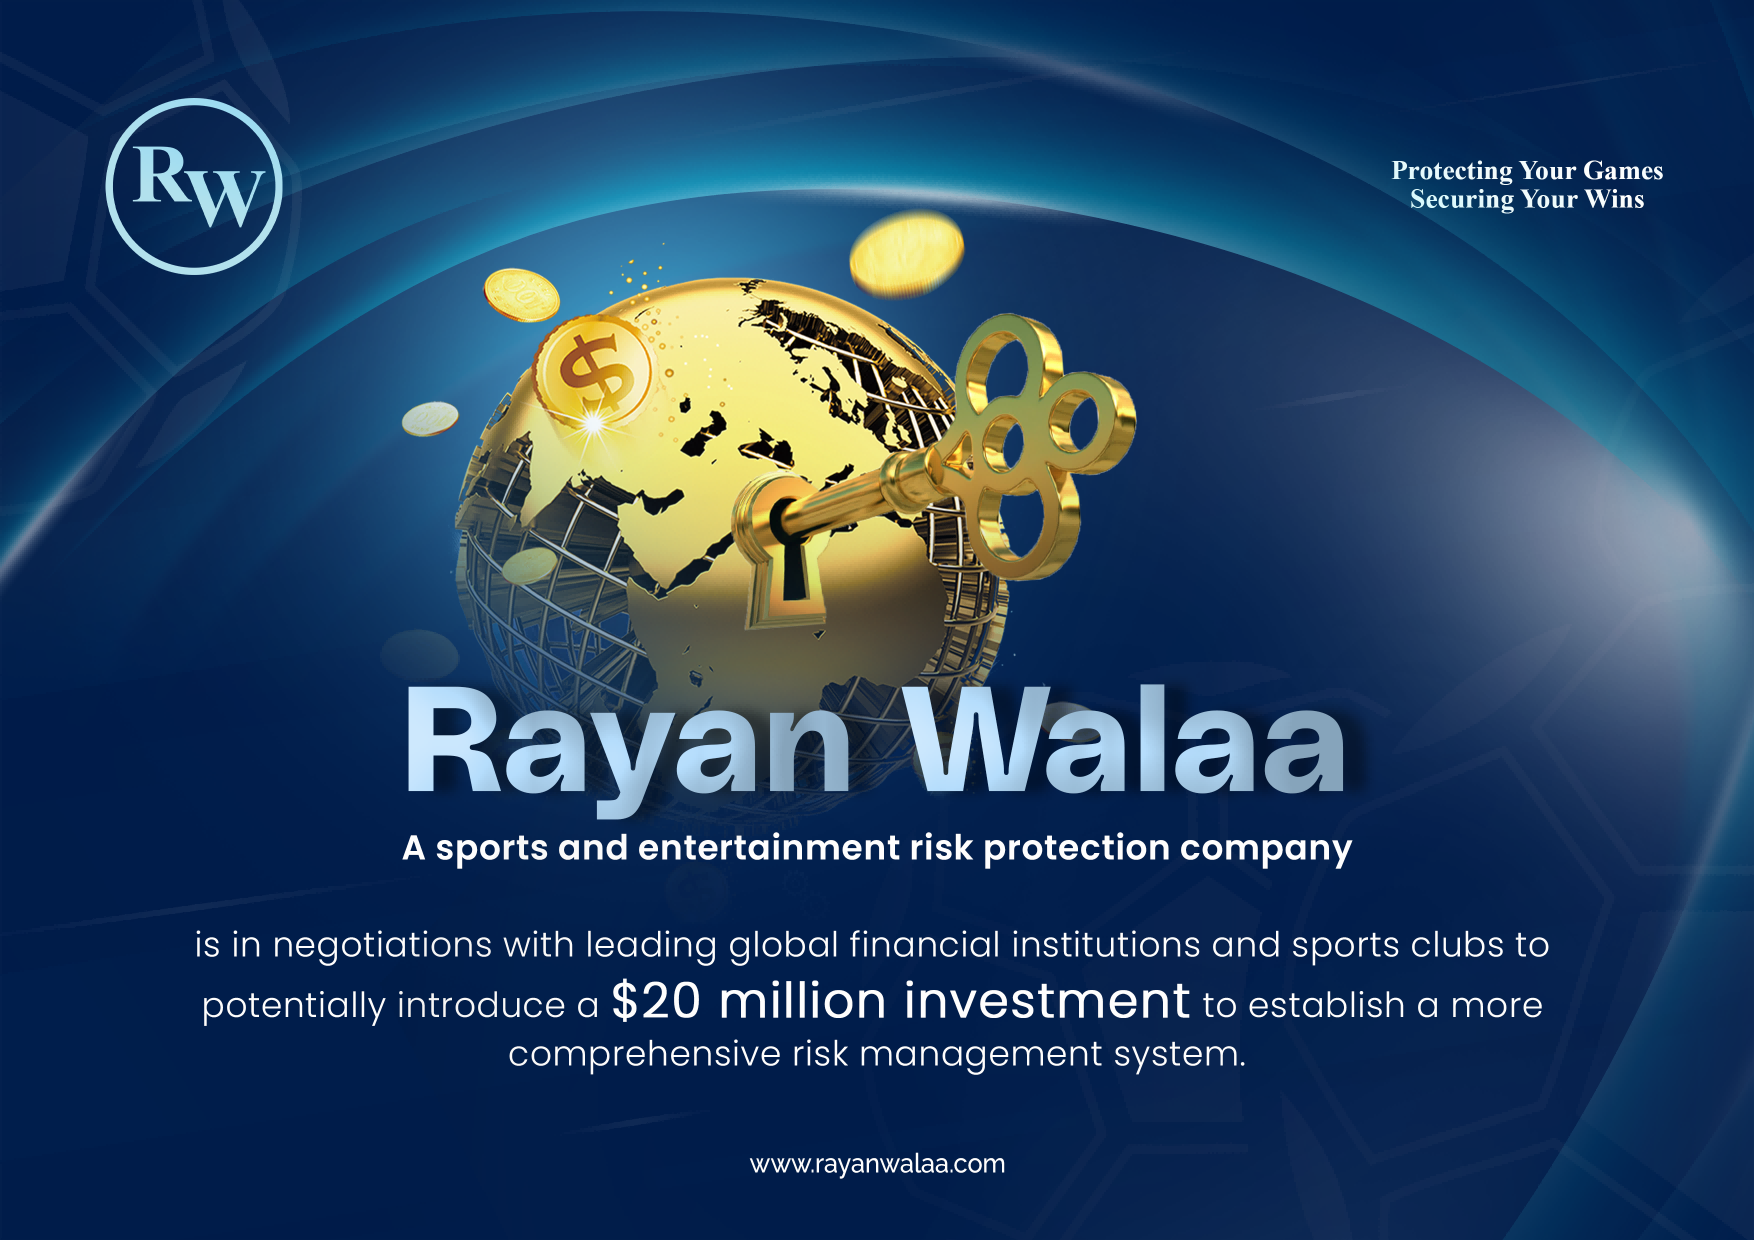 , Rayan Walaa, a pioneering sports entertainment risk protection company, is in discussions with top global financial institutions and sports clubs to potentially secure a $20 million investment